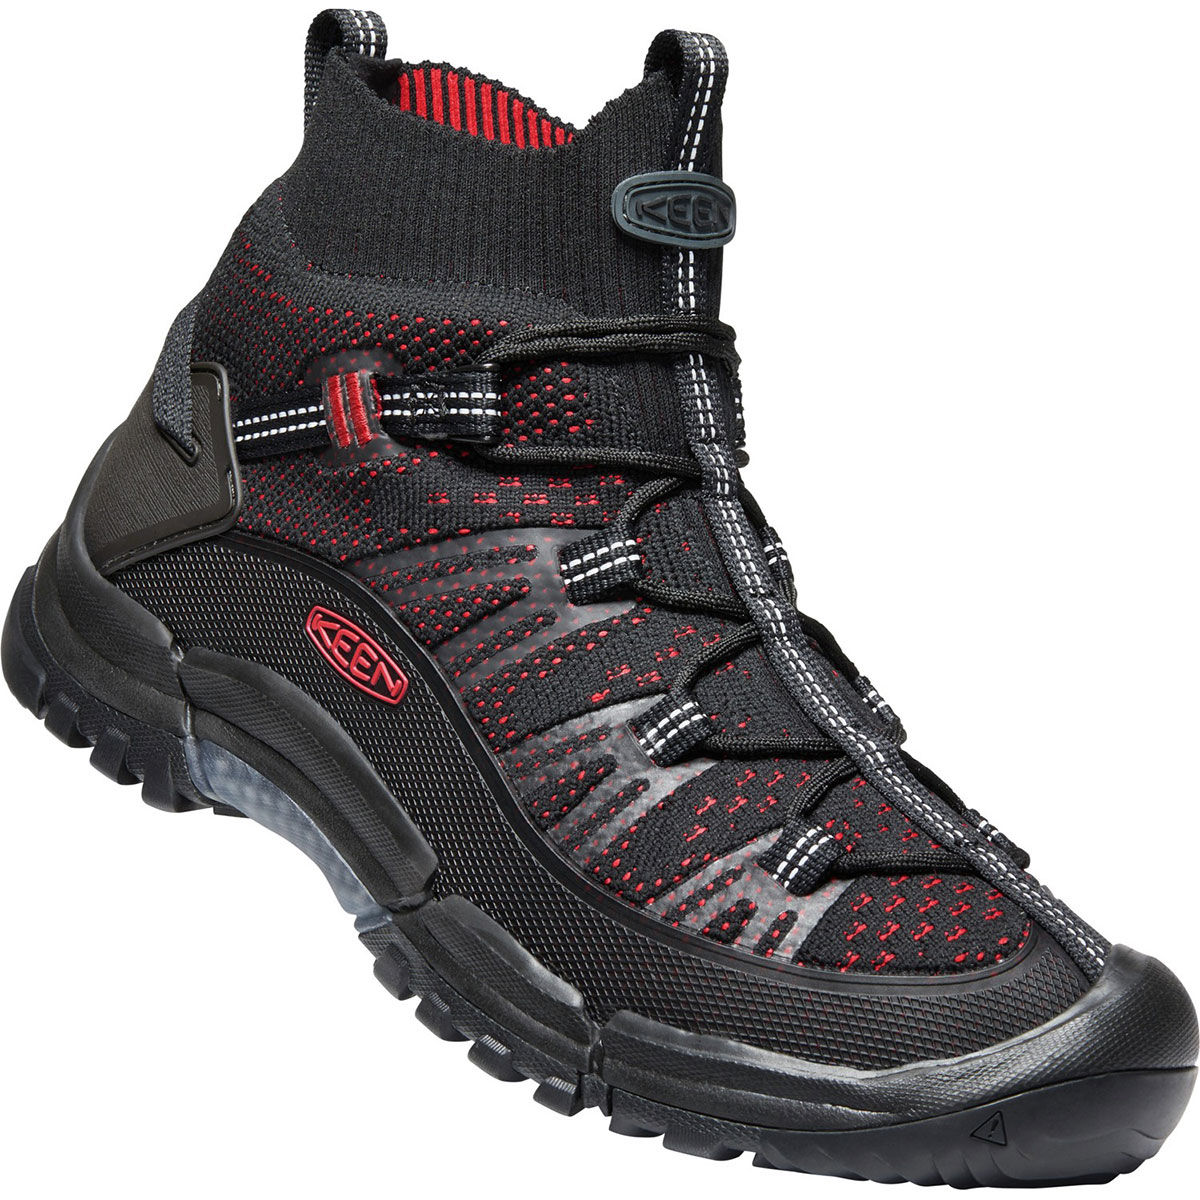 Keen Men's Axis Evo Mid Knit Hiking Boots - Black, 9.5